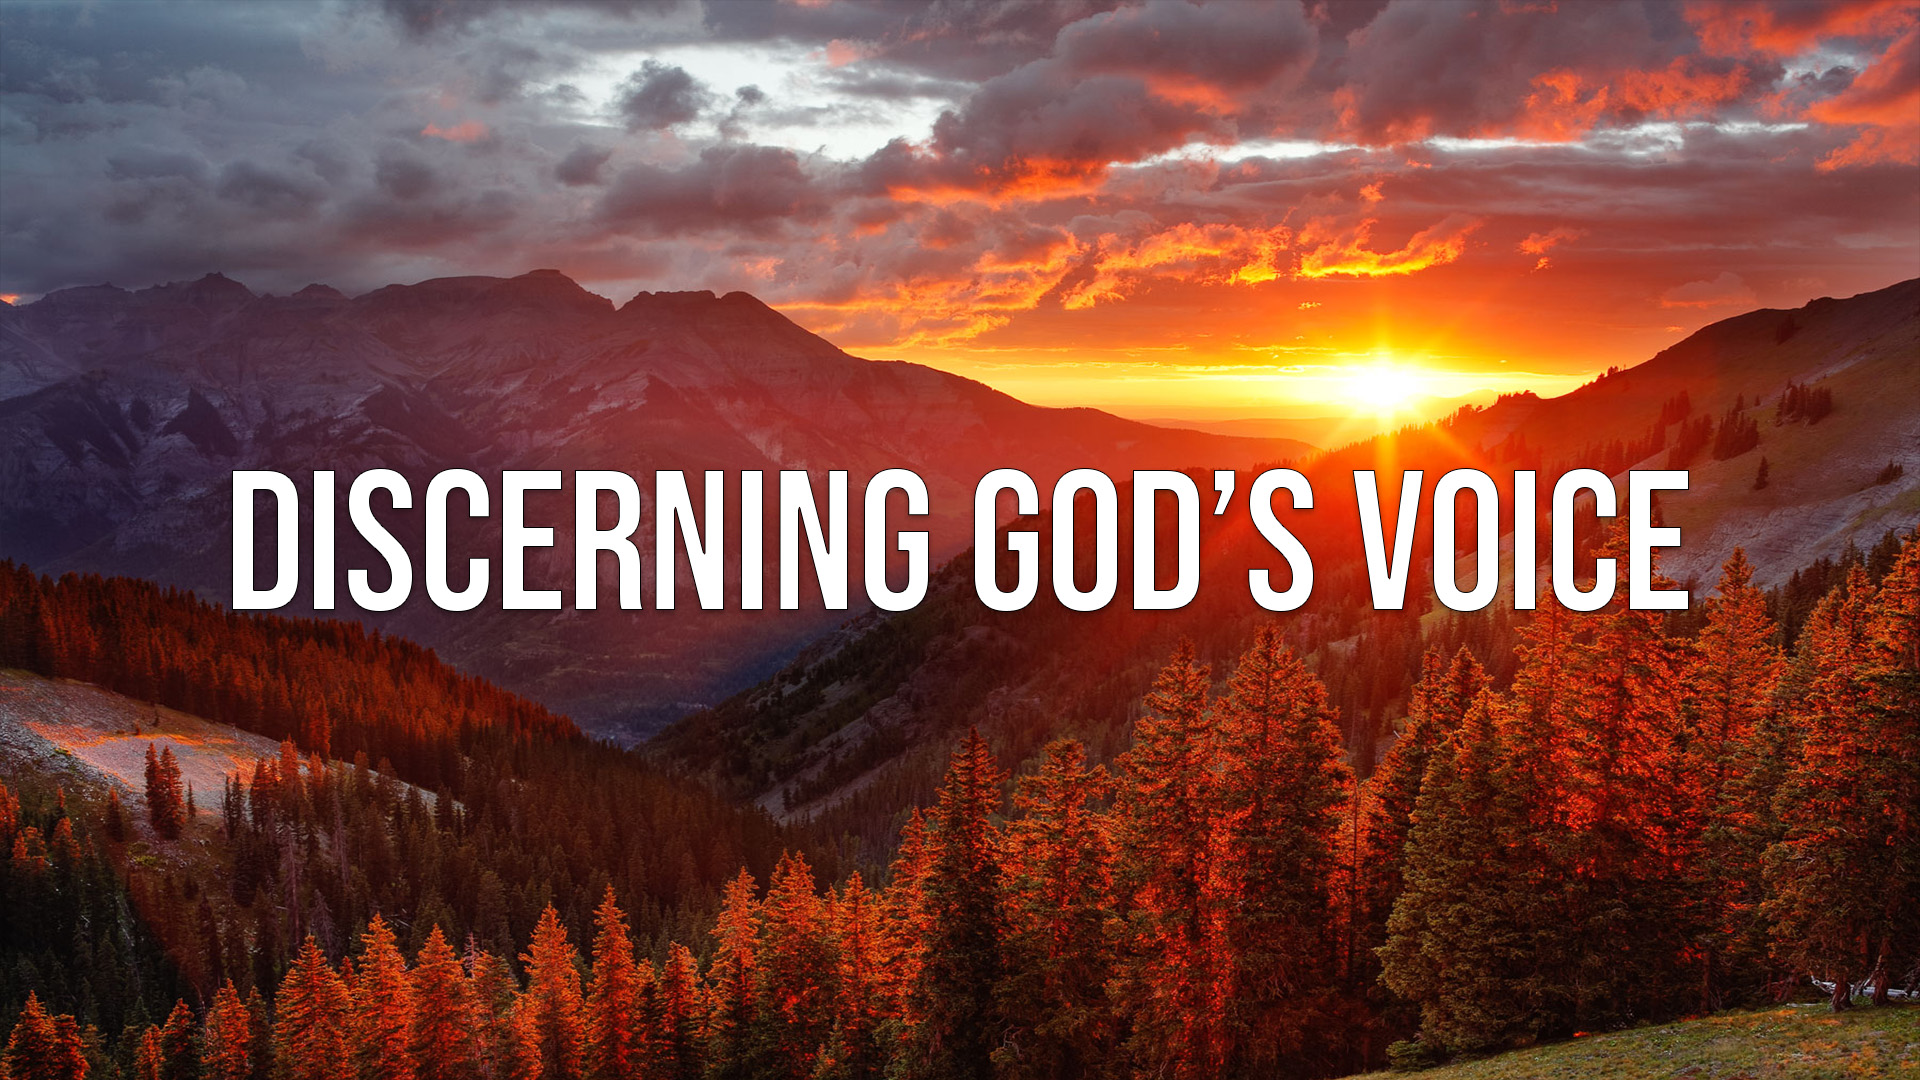 Discerning God's Voice - Why He Speaks - His Plans, His Timing